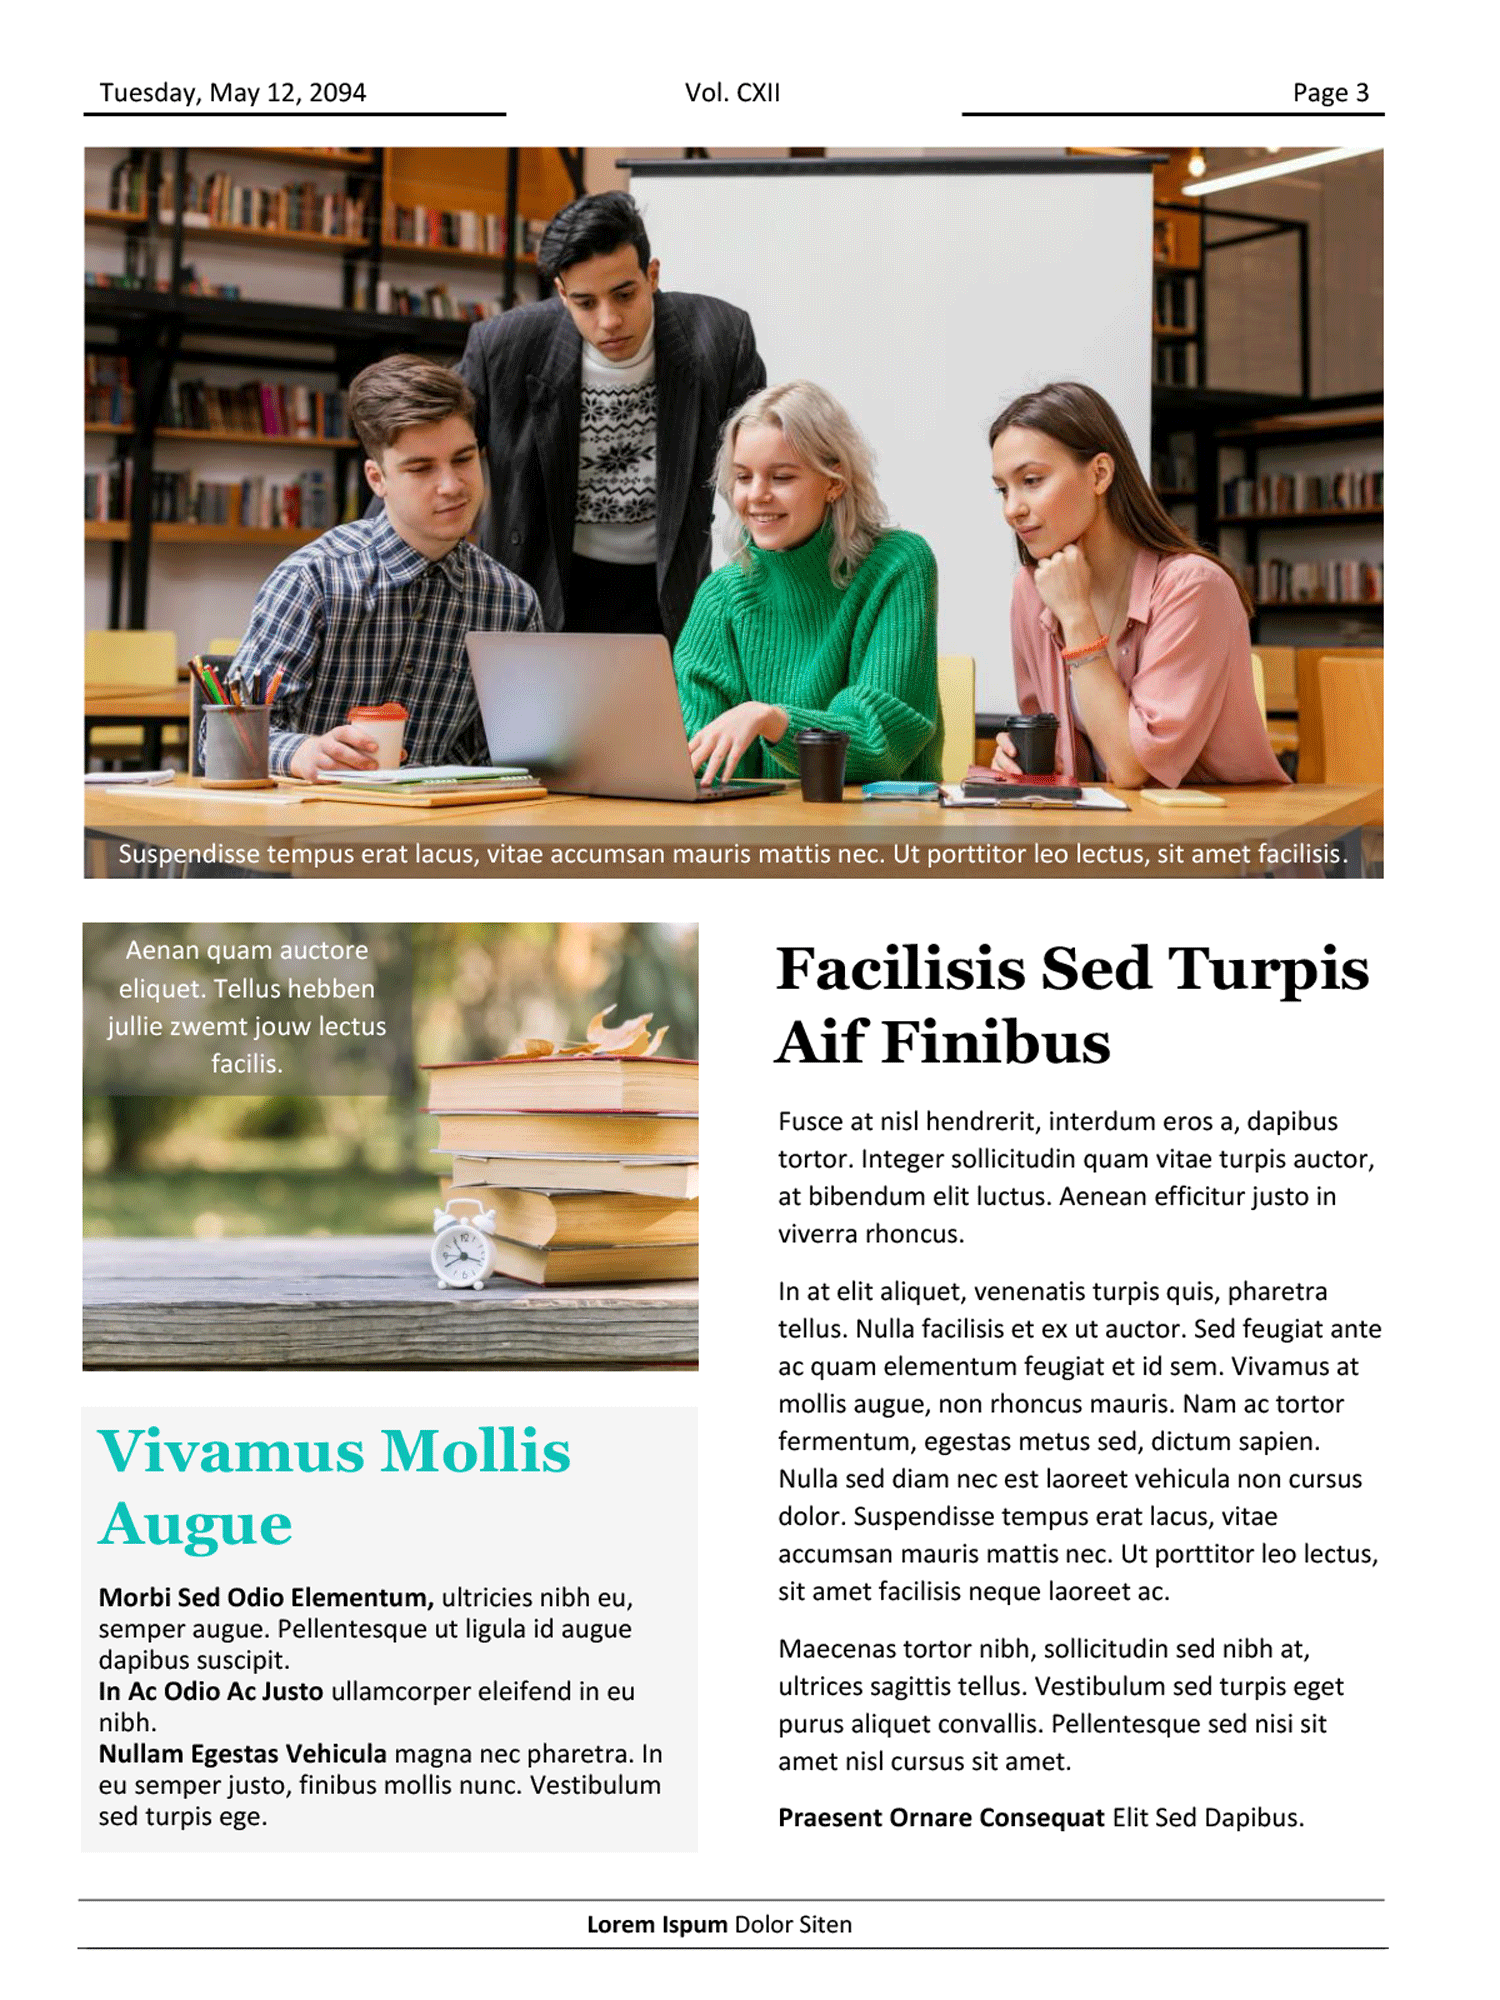 News Article Template for Students - Word, Google Docs